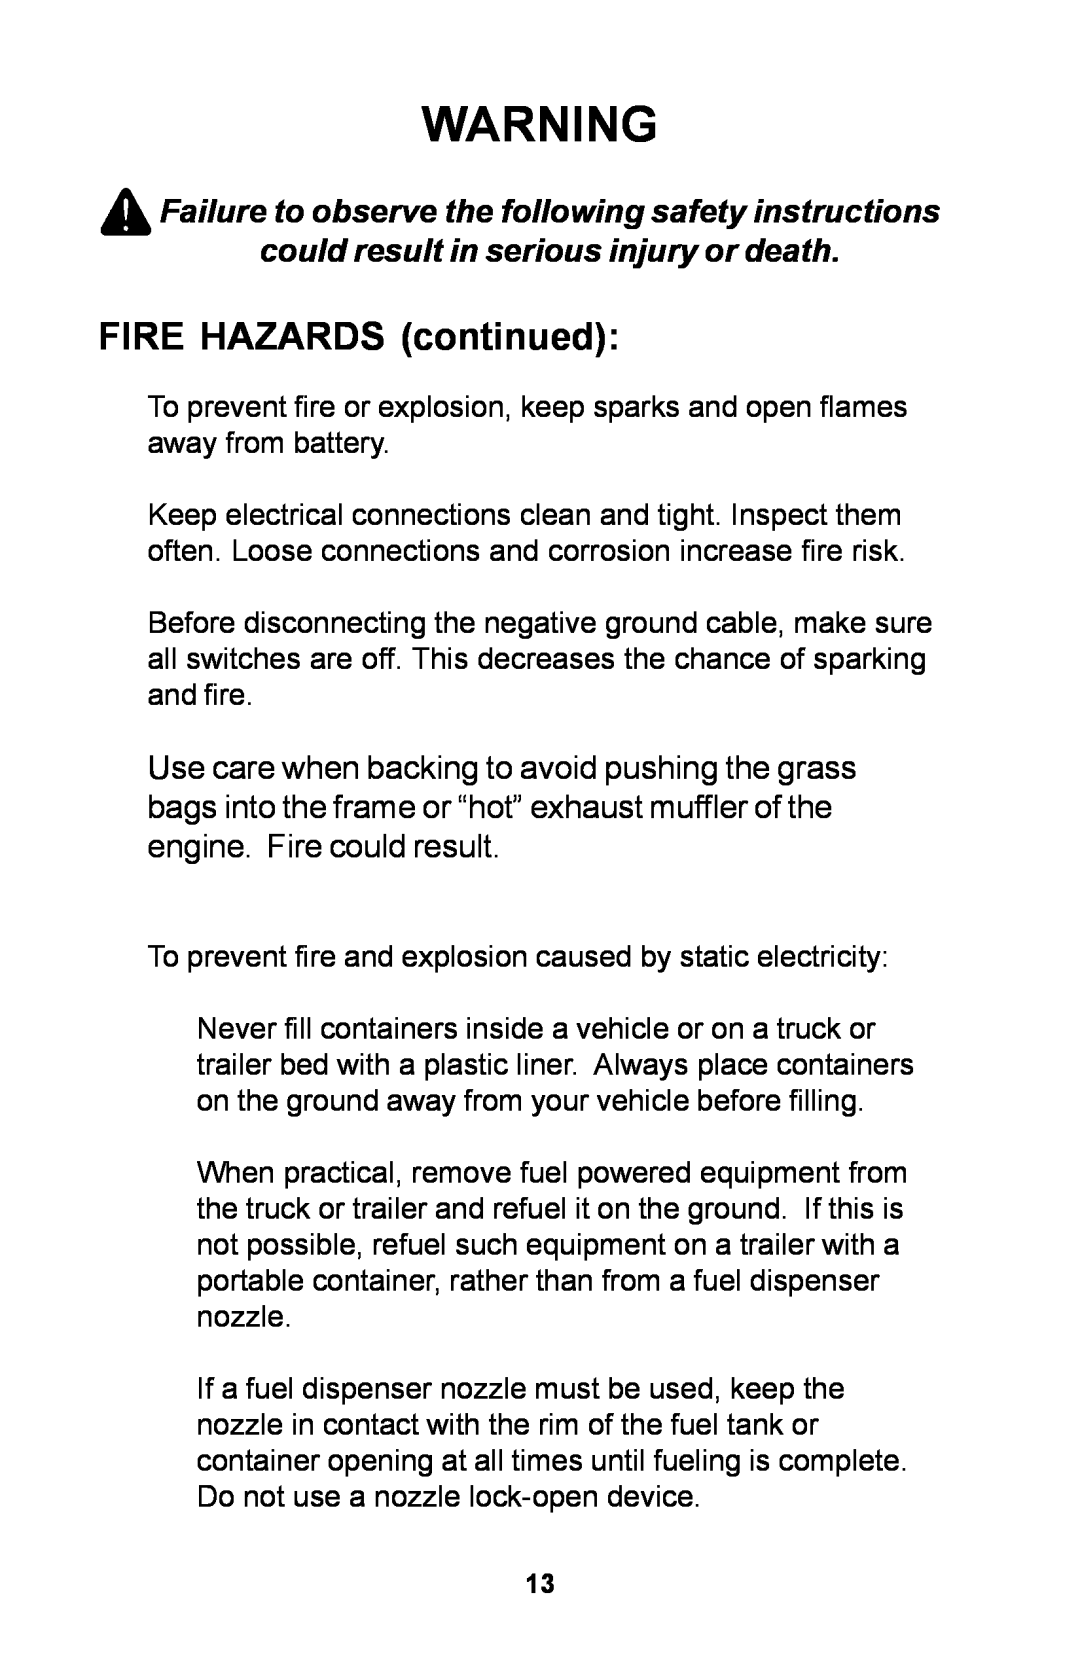 Dixon ZTR manual FIRE HAZARDS continued, Failure to observe the following safety instructions 